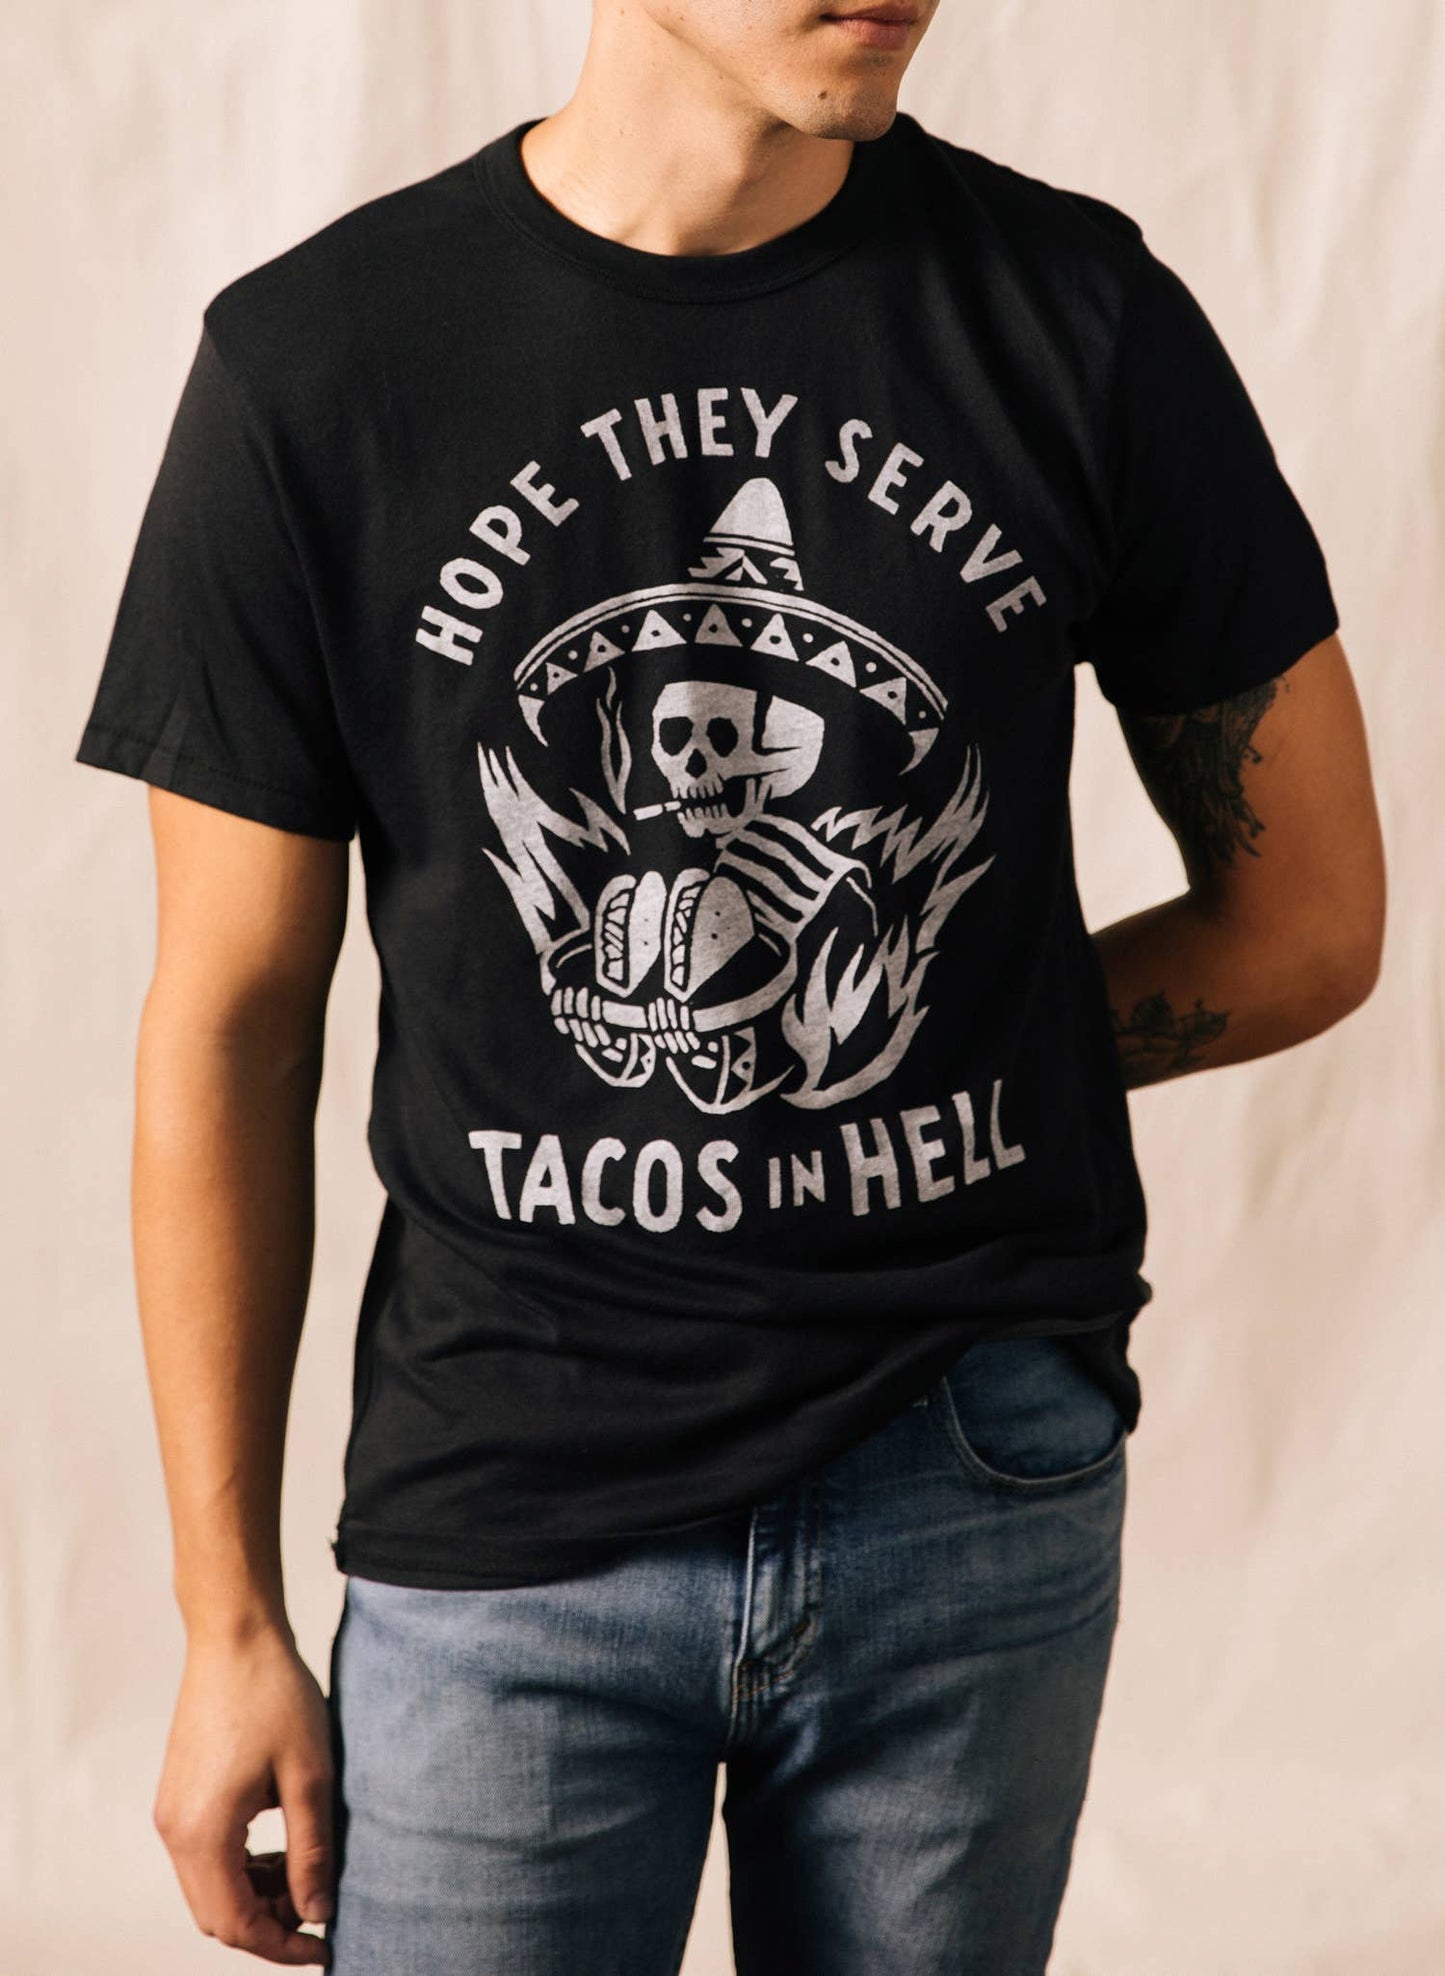 Tee (Short Sleeve) - Hope They Serve Tacos In Hell